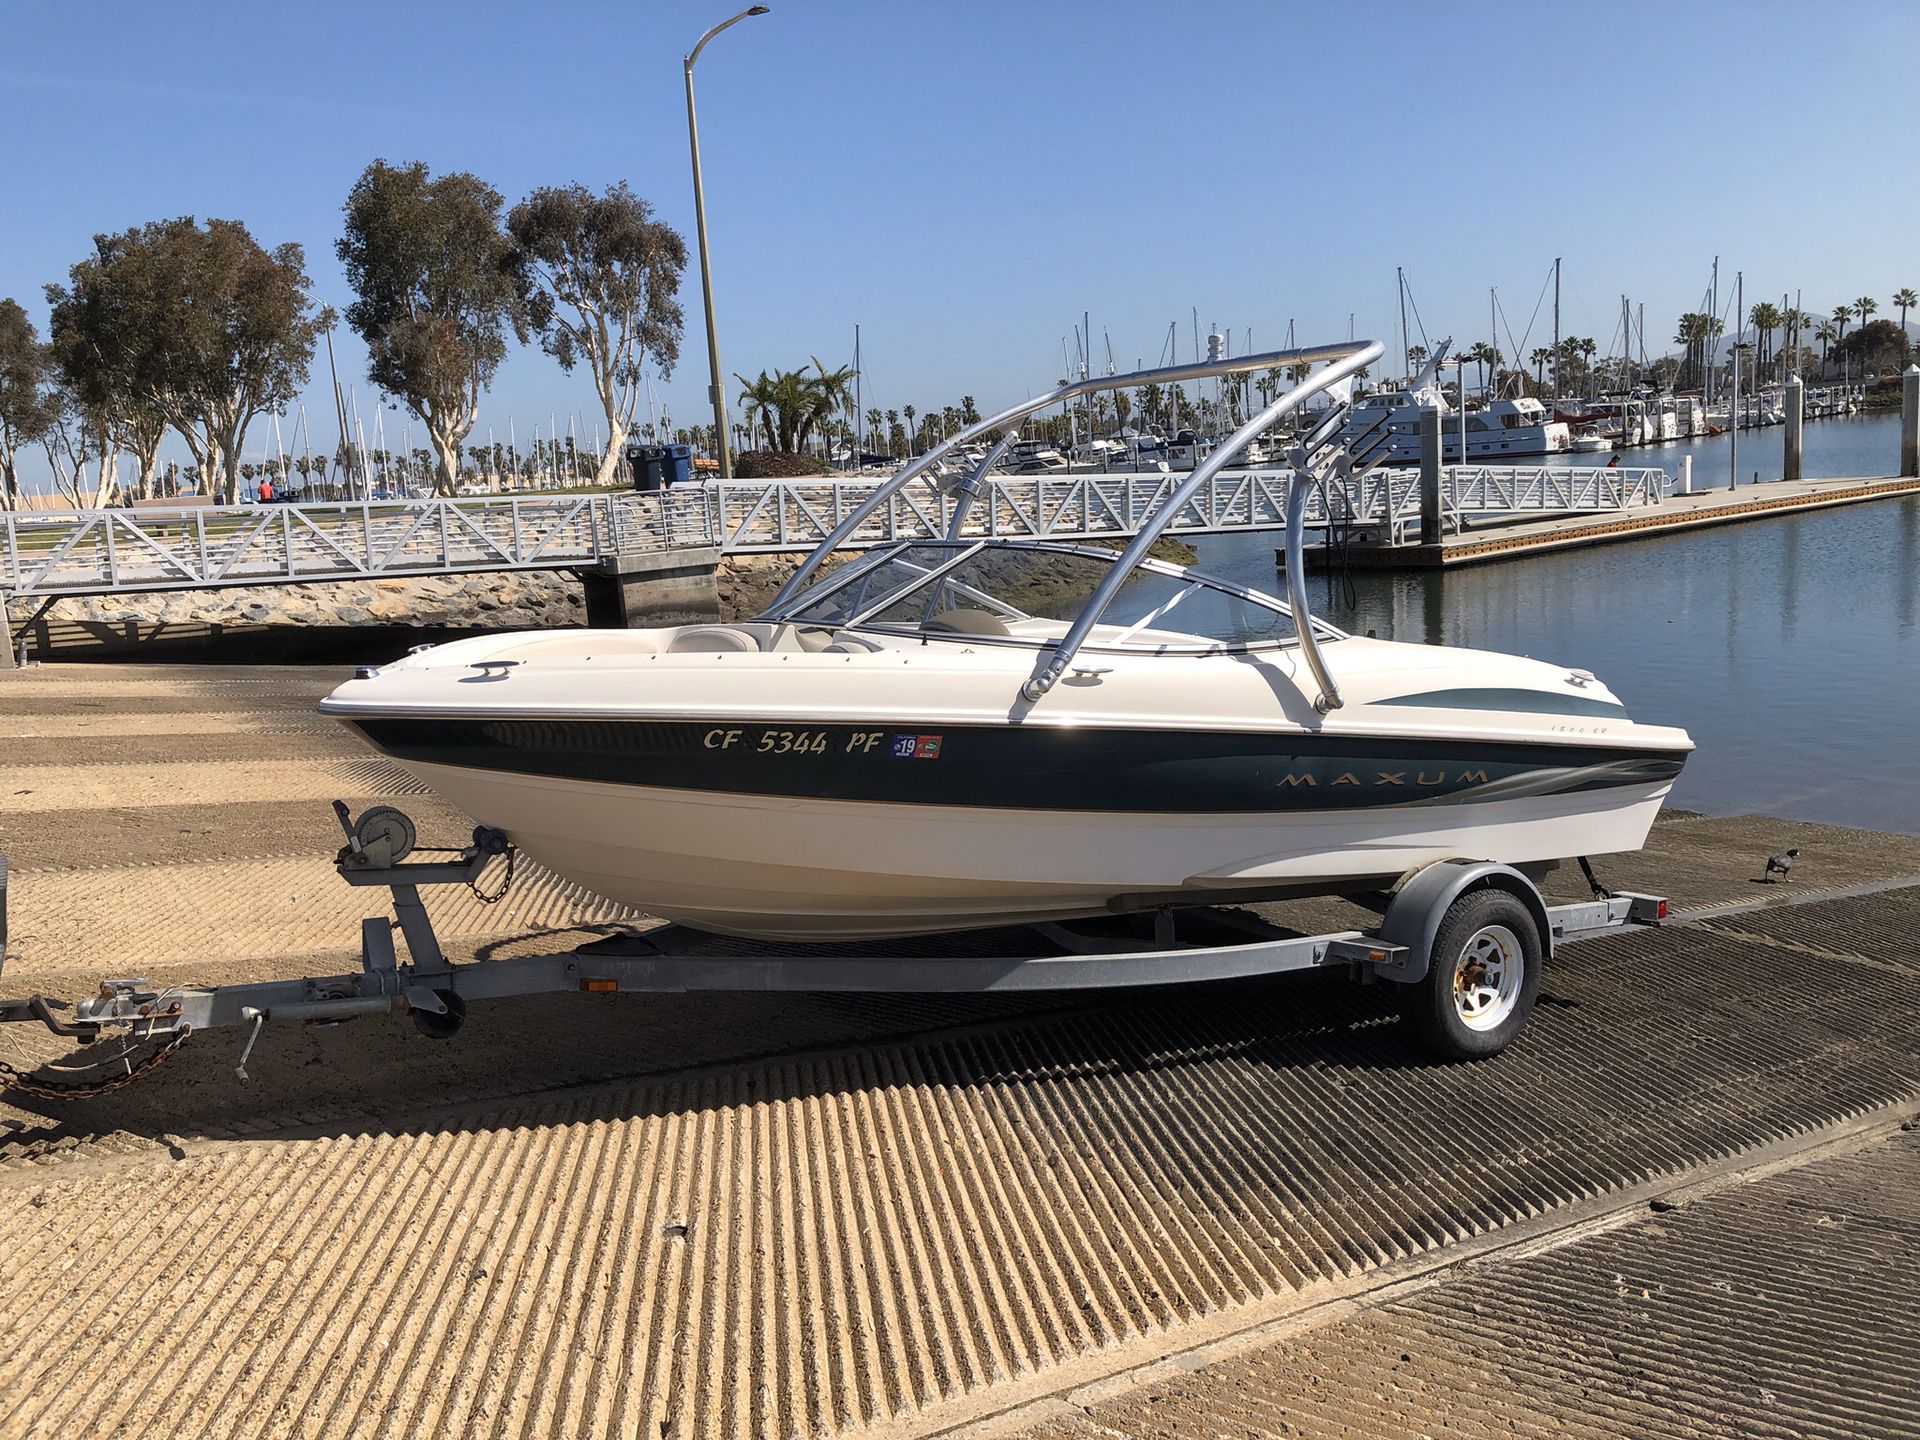 1999 Ski boat - Maxum 18.5 length with 3.0 motor. In great shape just not using it much these days. No issues boat runs great. Asking $5800